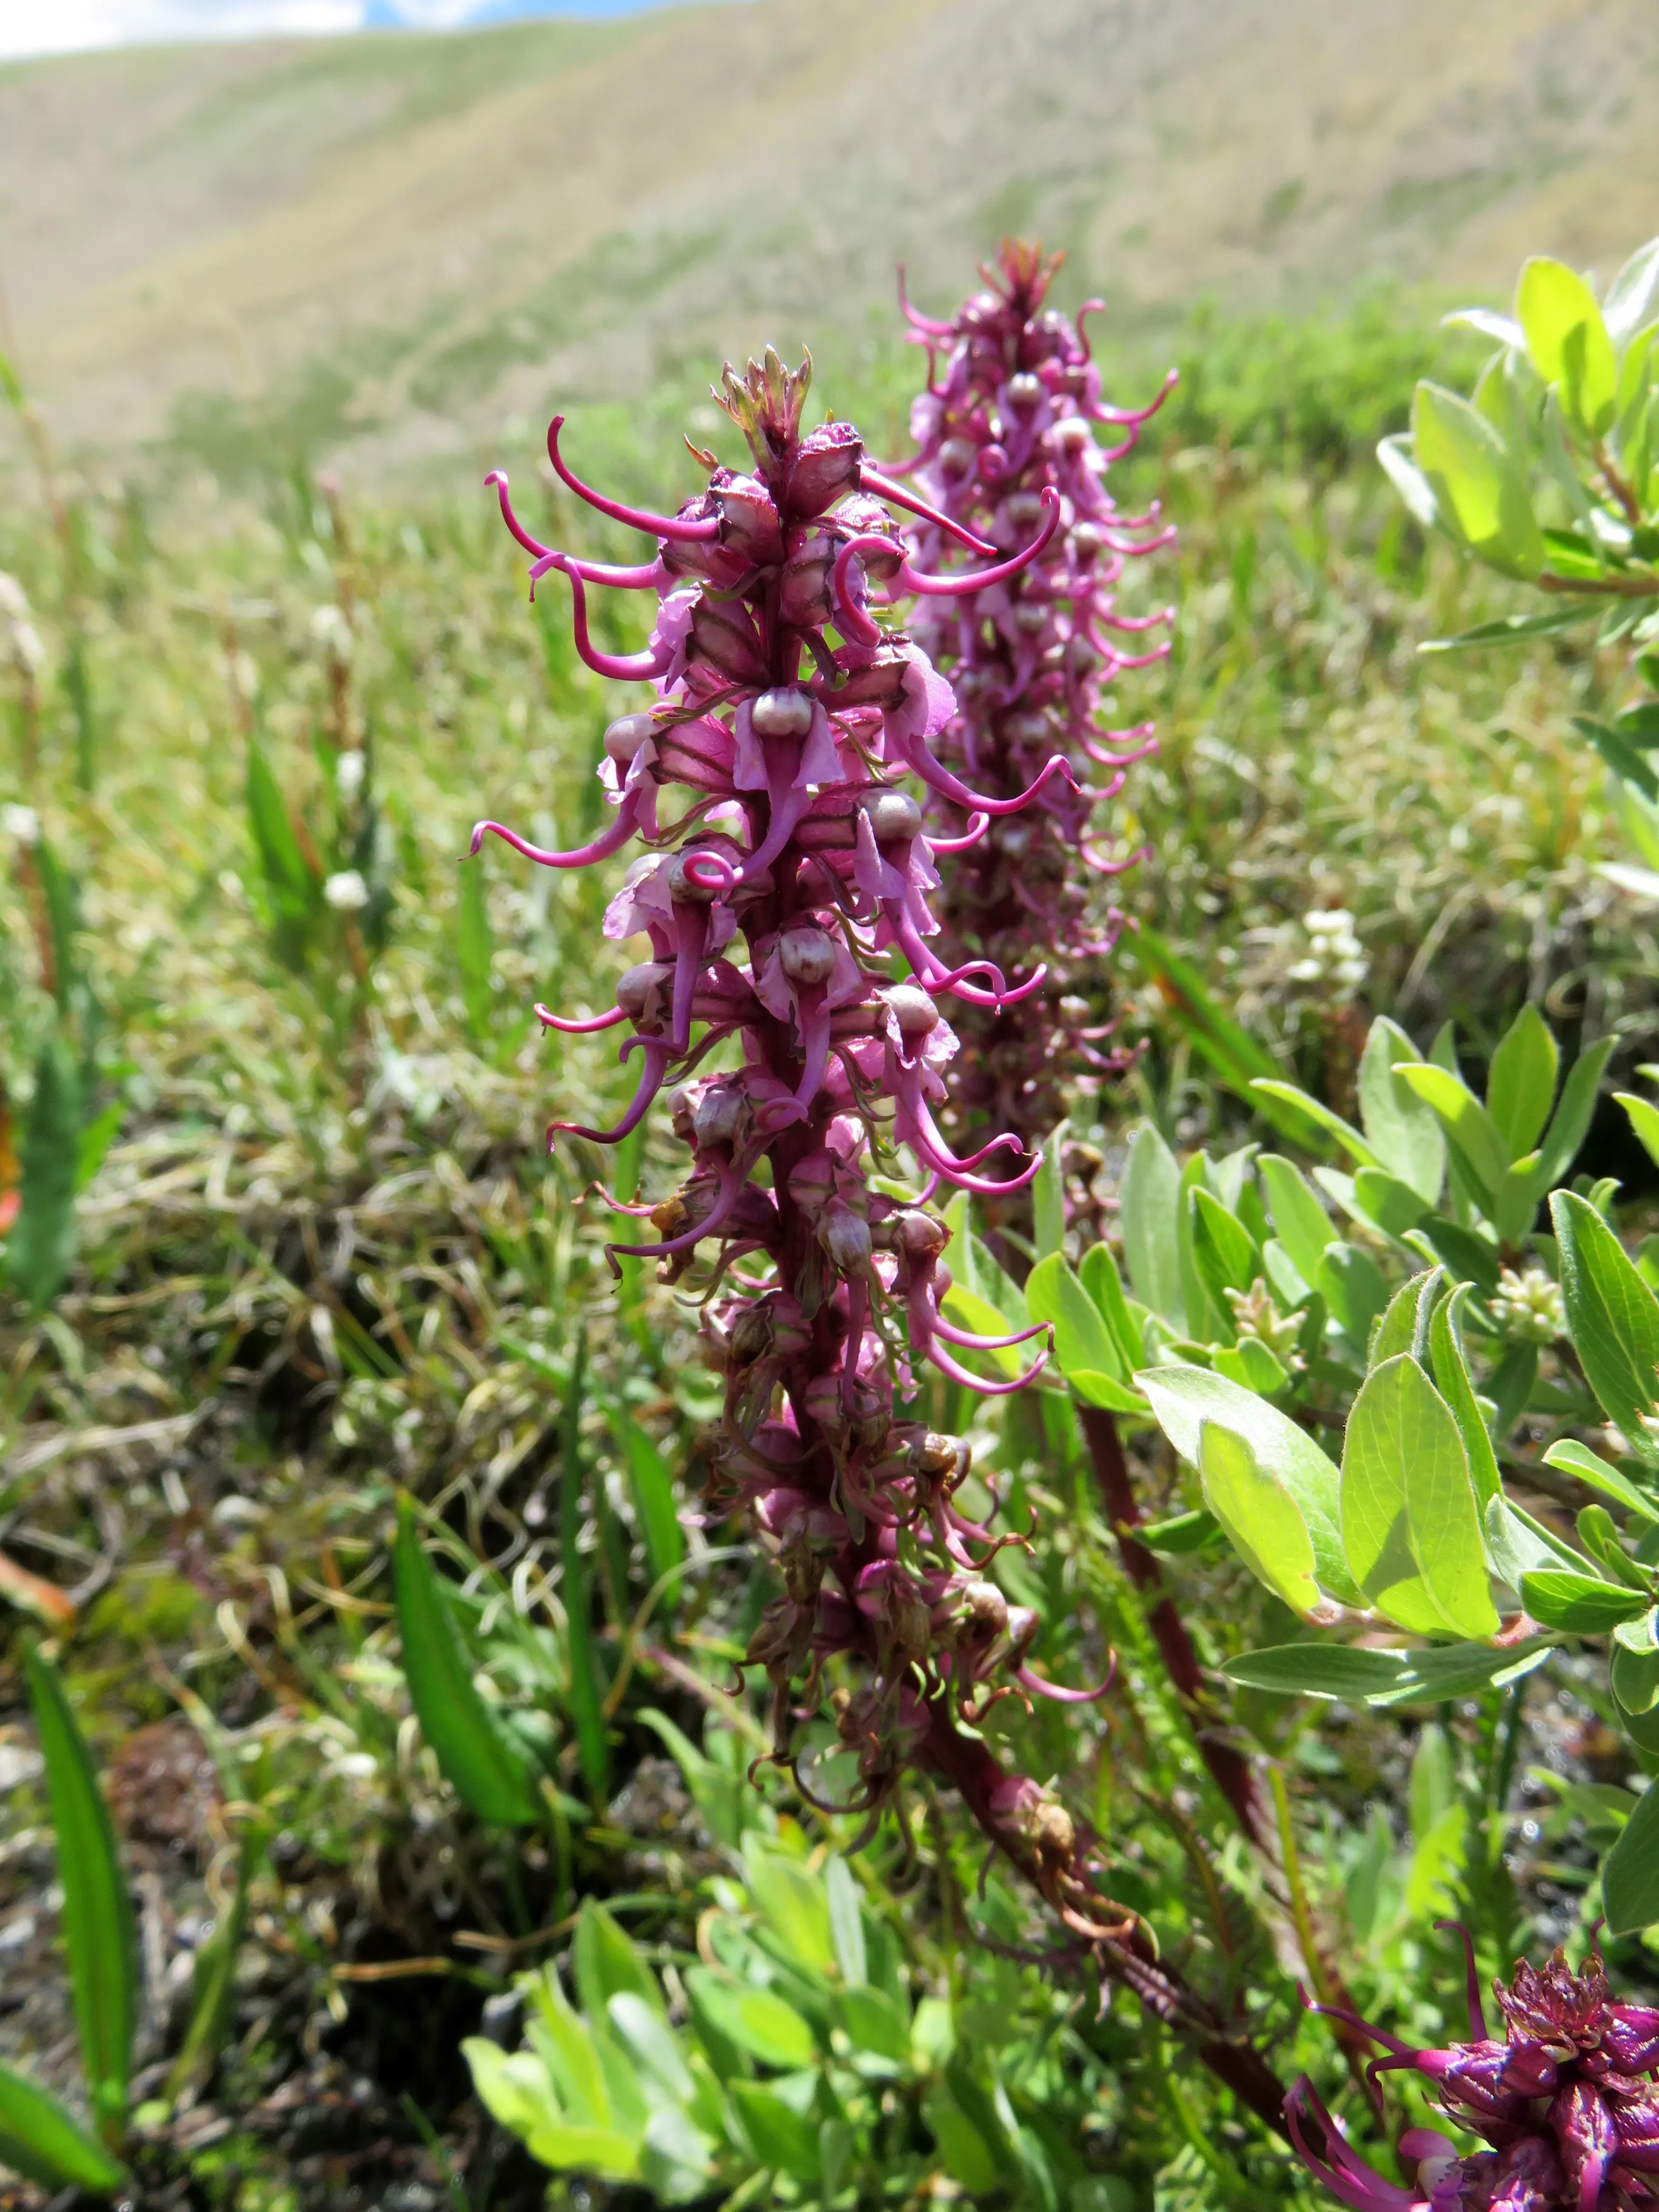 Little Elephantshead - An example of one of the plants that will be found around the wetland site